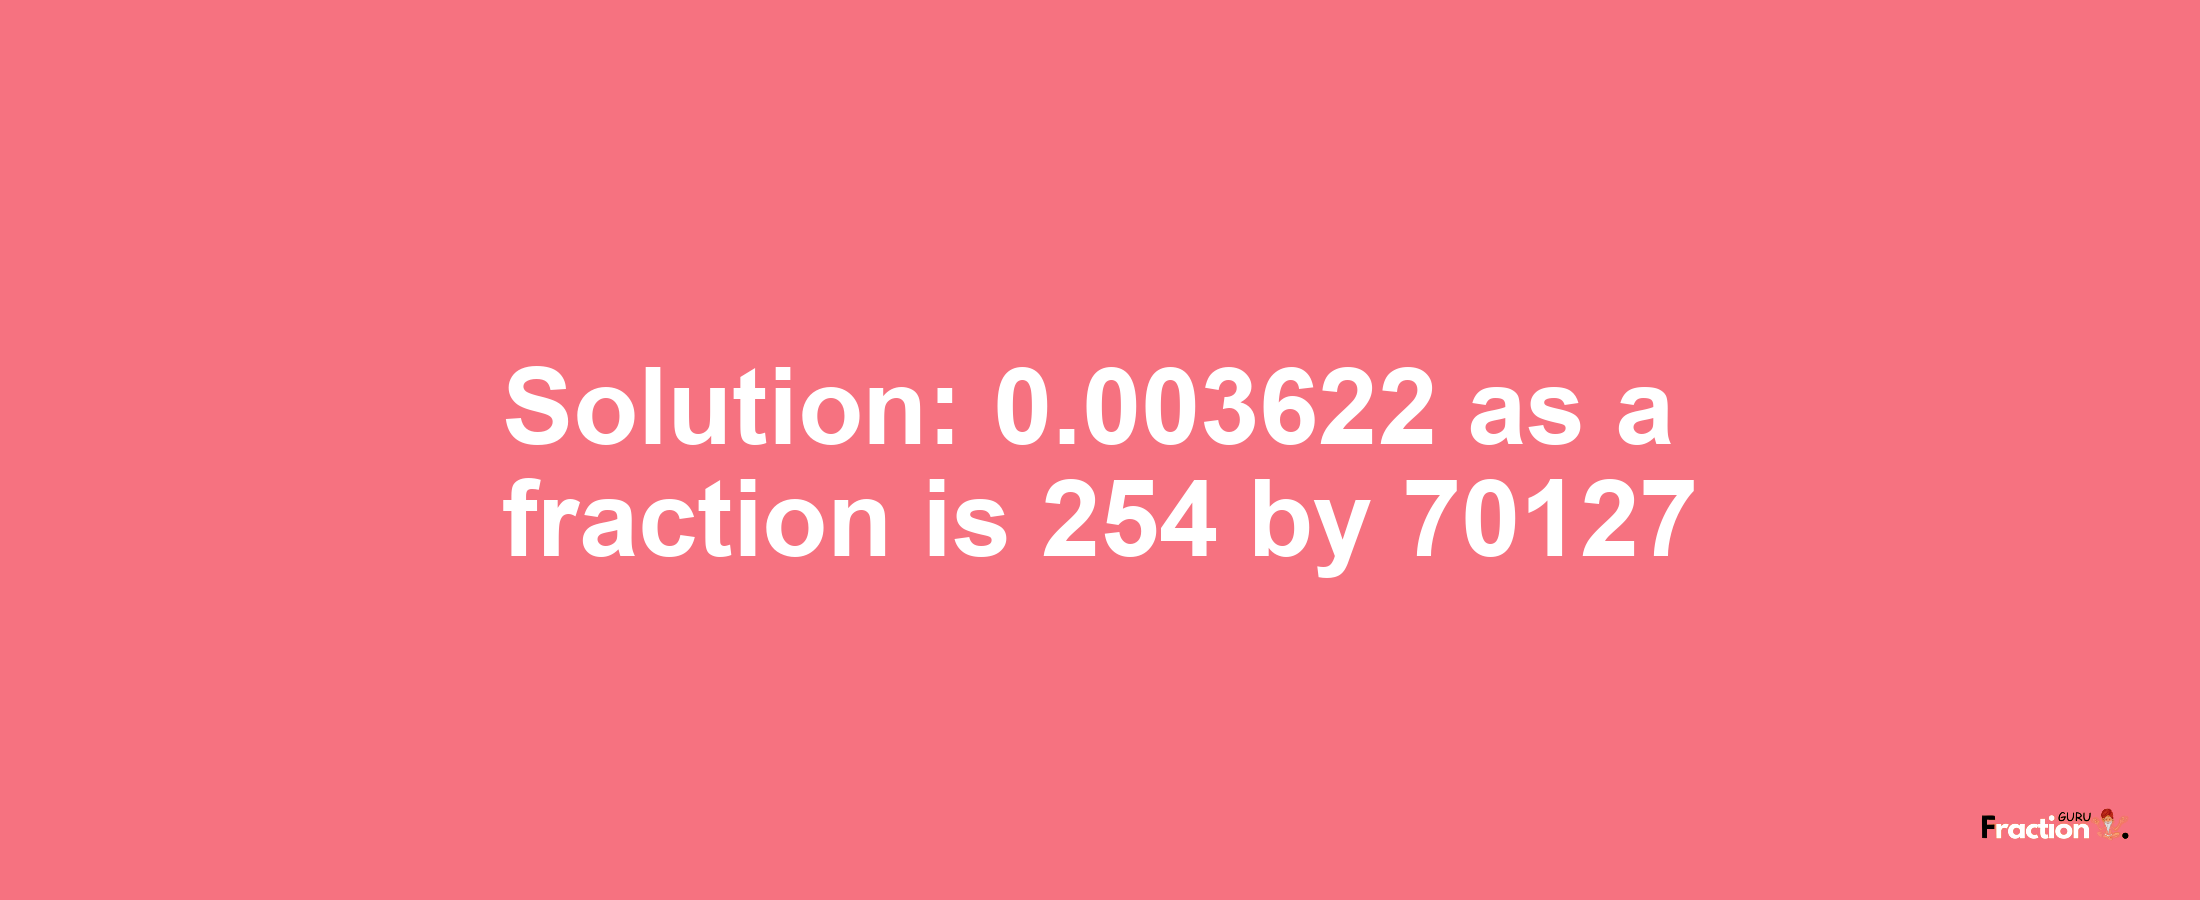 Solution:0.003622 as a fraction is 254/70127